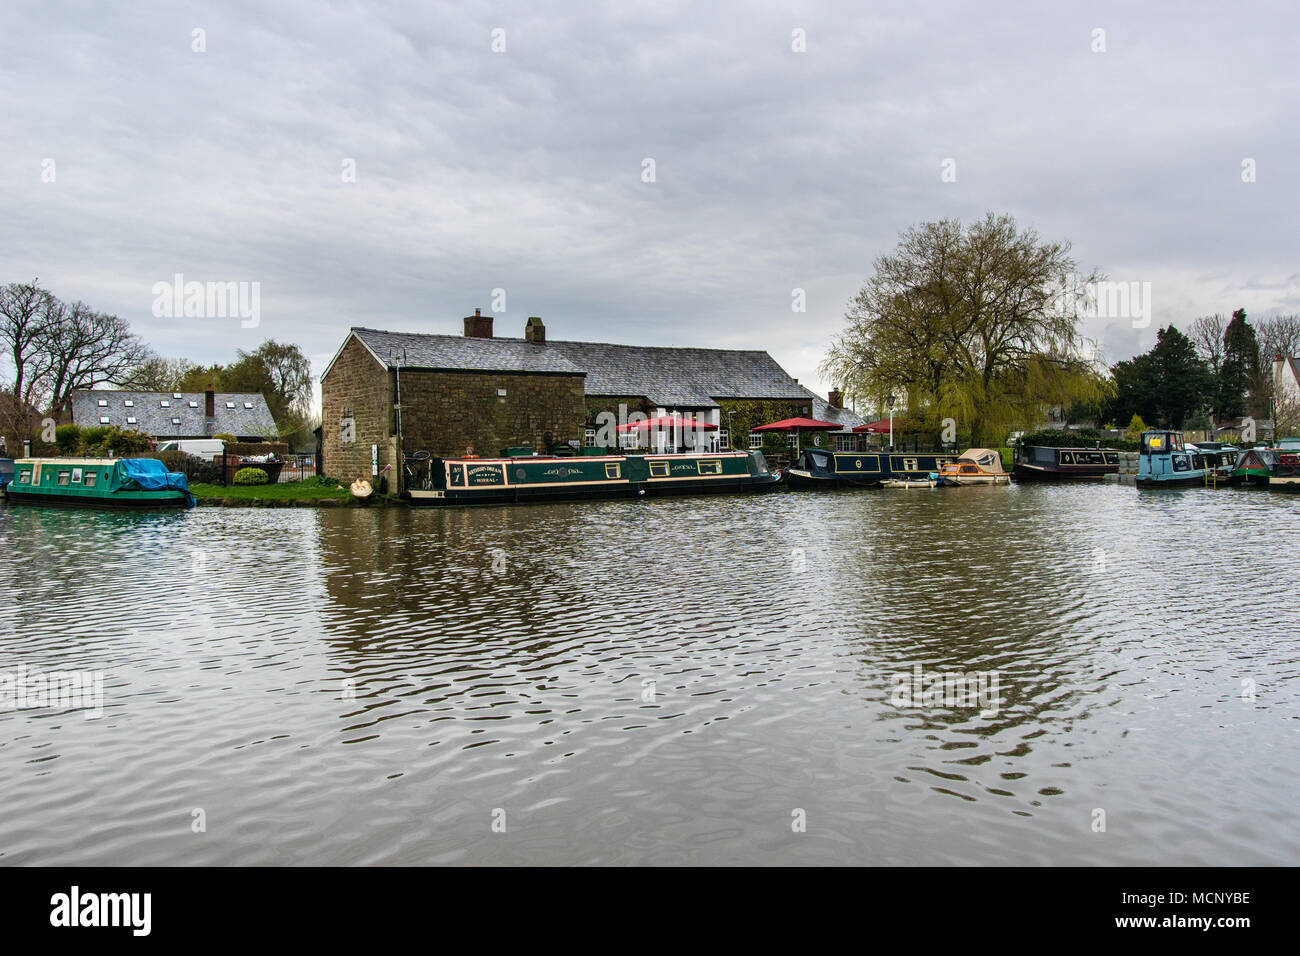 Garstang, Lancashire. 17th April 2018. UK Weather: news. A wet and overcast day at the Lancashire canal in Garstang. The canal is 41 miles long and is level throughout offering the longest stretch of lock free cruising in the country. Credit: gary telford/Alamy Live News Stock Photo